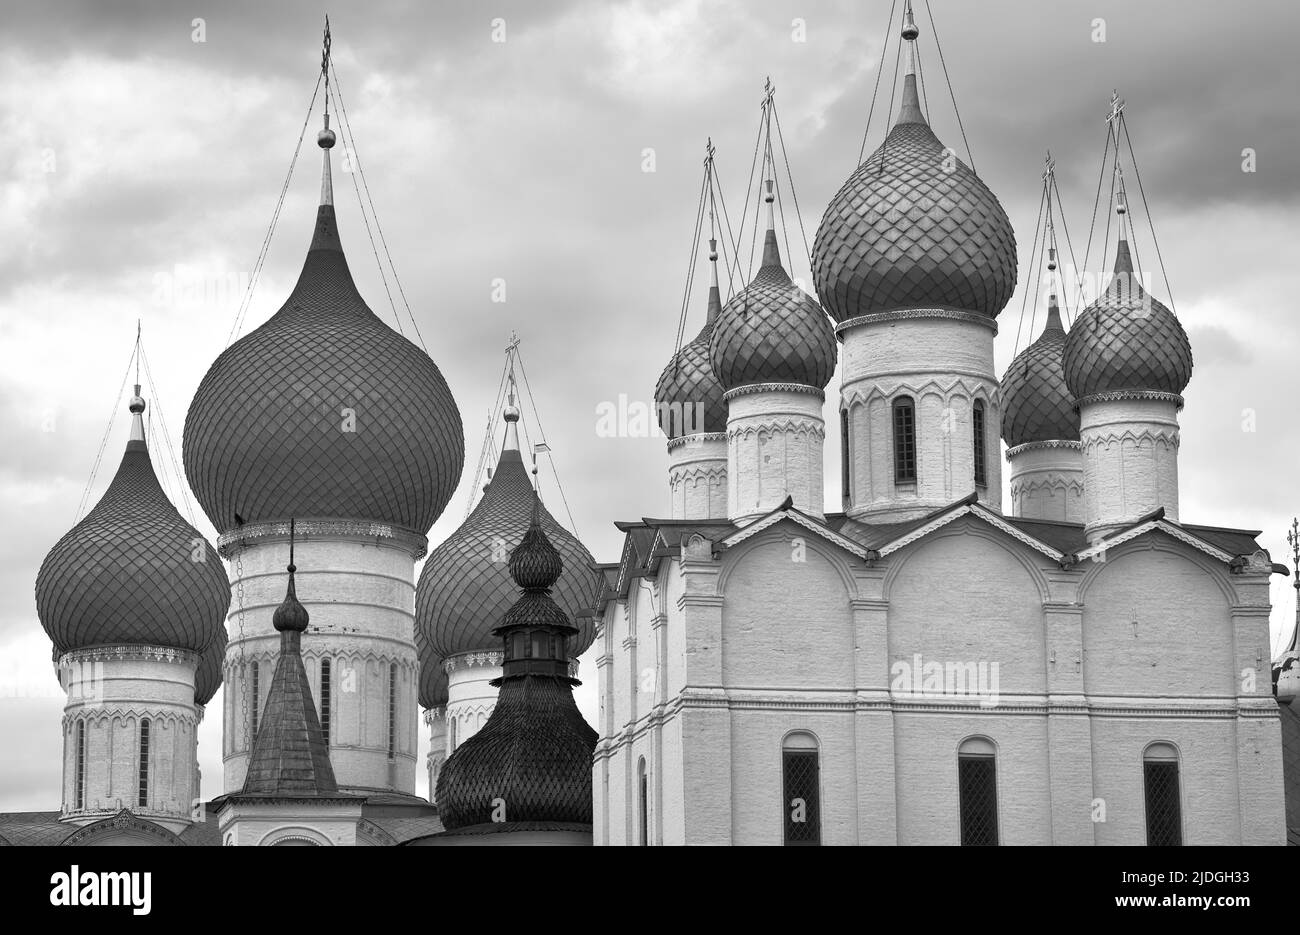 The Kremlin of Rostov the Great. Domes of the Church of the Resurrection and the Assumption Cathedral, Russian architecture of the XVI-XVII centuries. Stock Photo